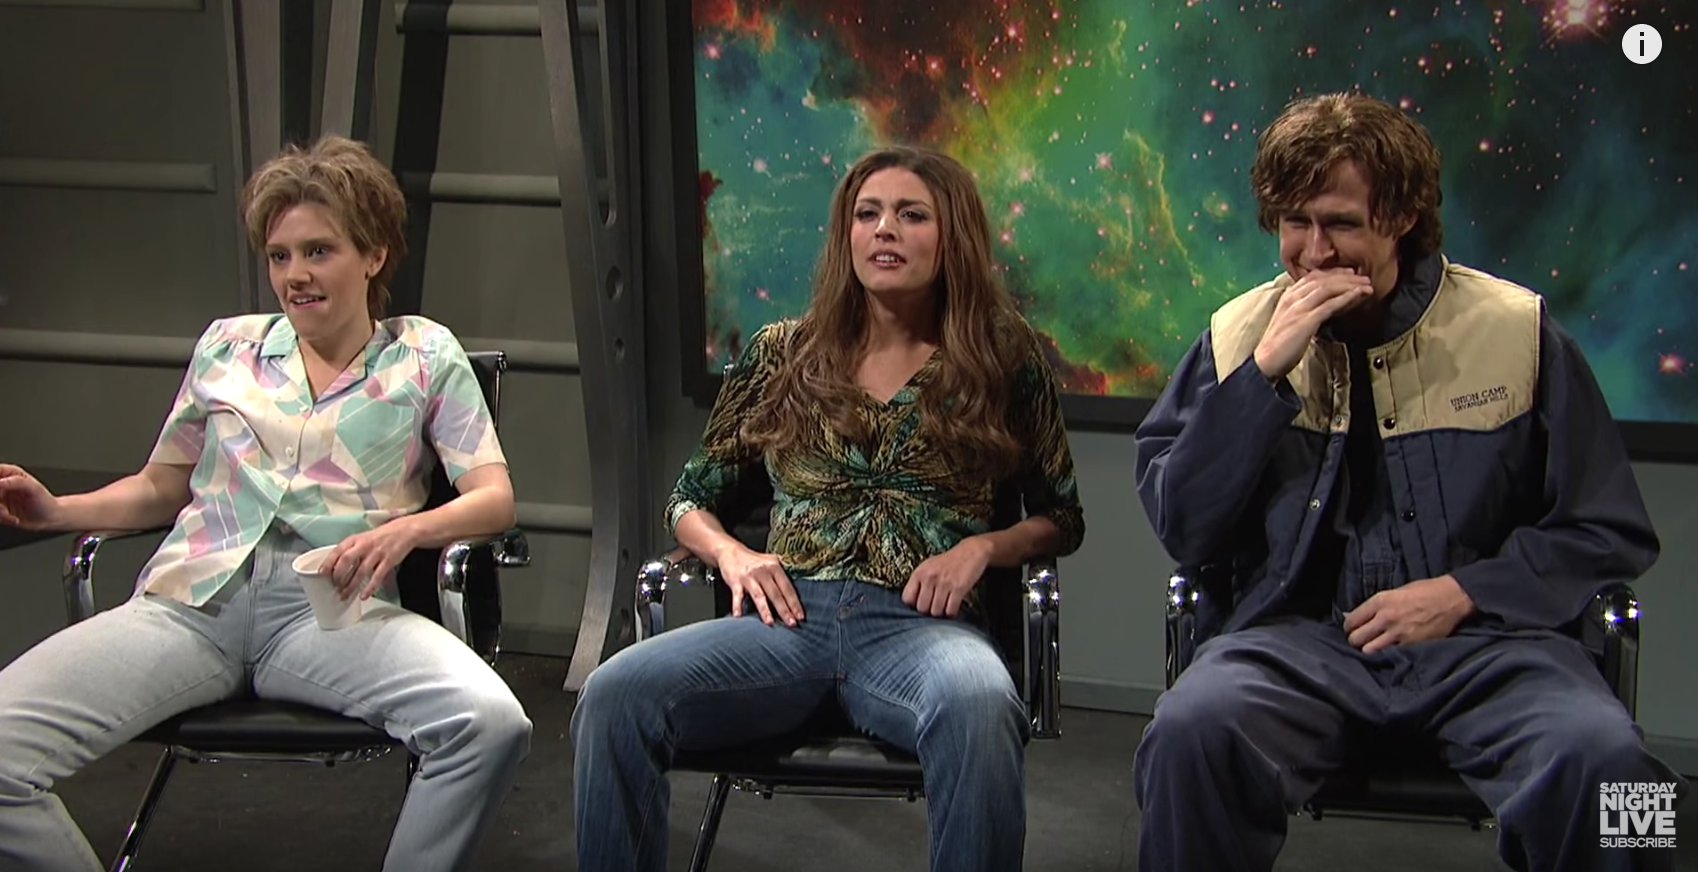 Ryan Gosling joins the pantheon of great moments in Saturday Night Live laughing breaks